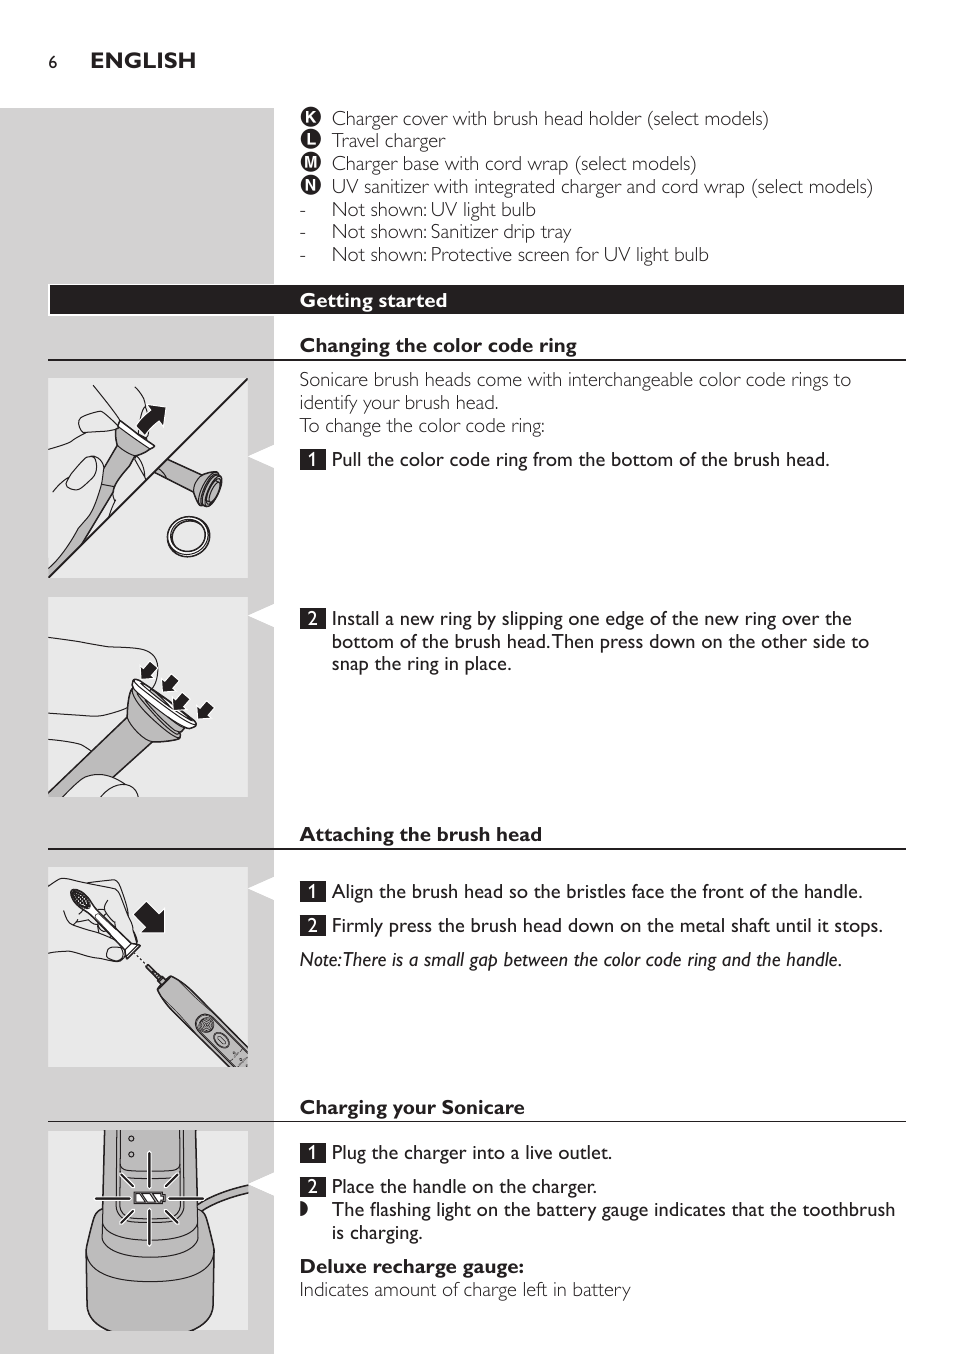 Getting started, Changing the color code ring, Attaching the brush head |  Philips sonic toothbrush FlexCare 900 User Manual | Page 6 / 16